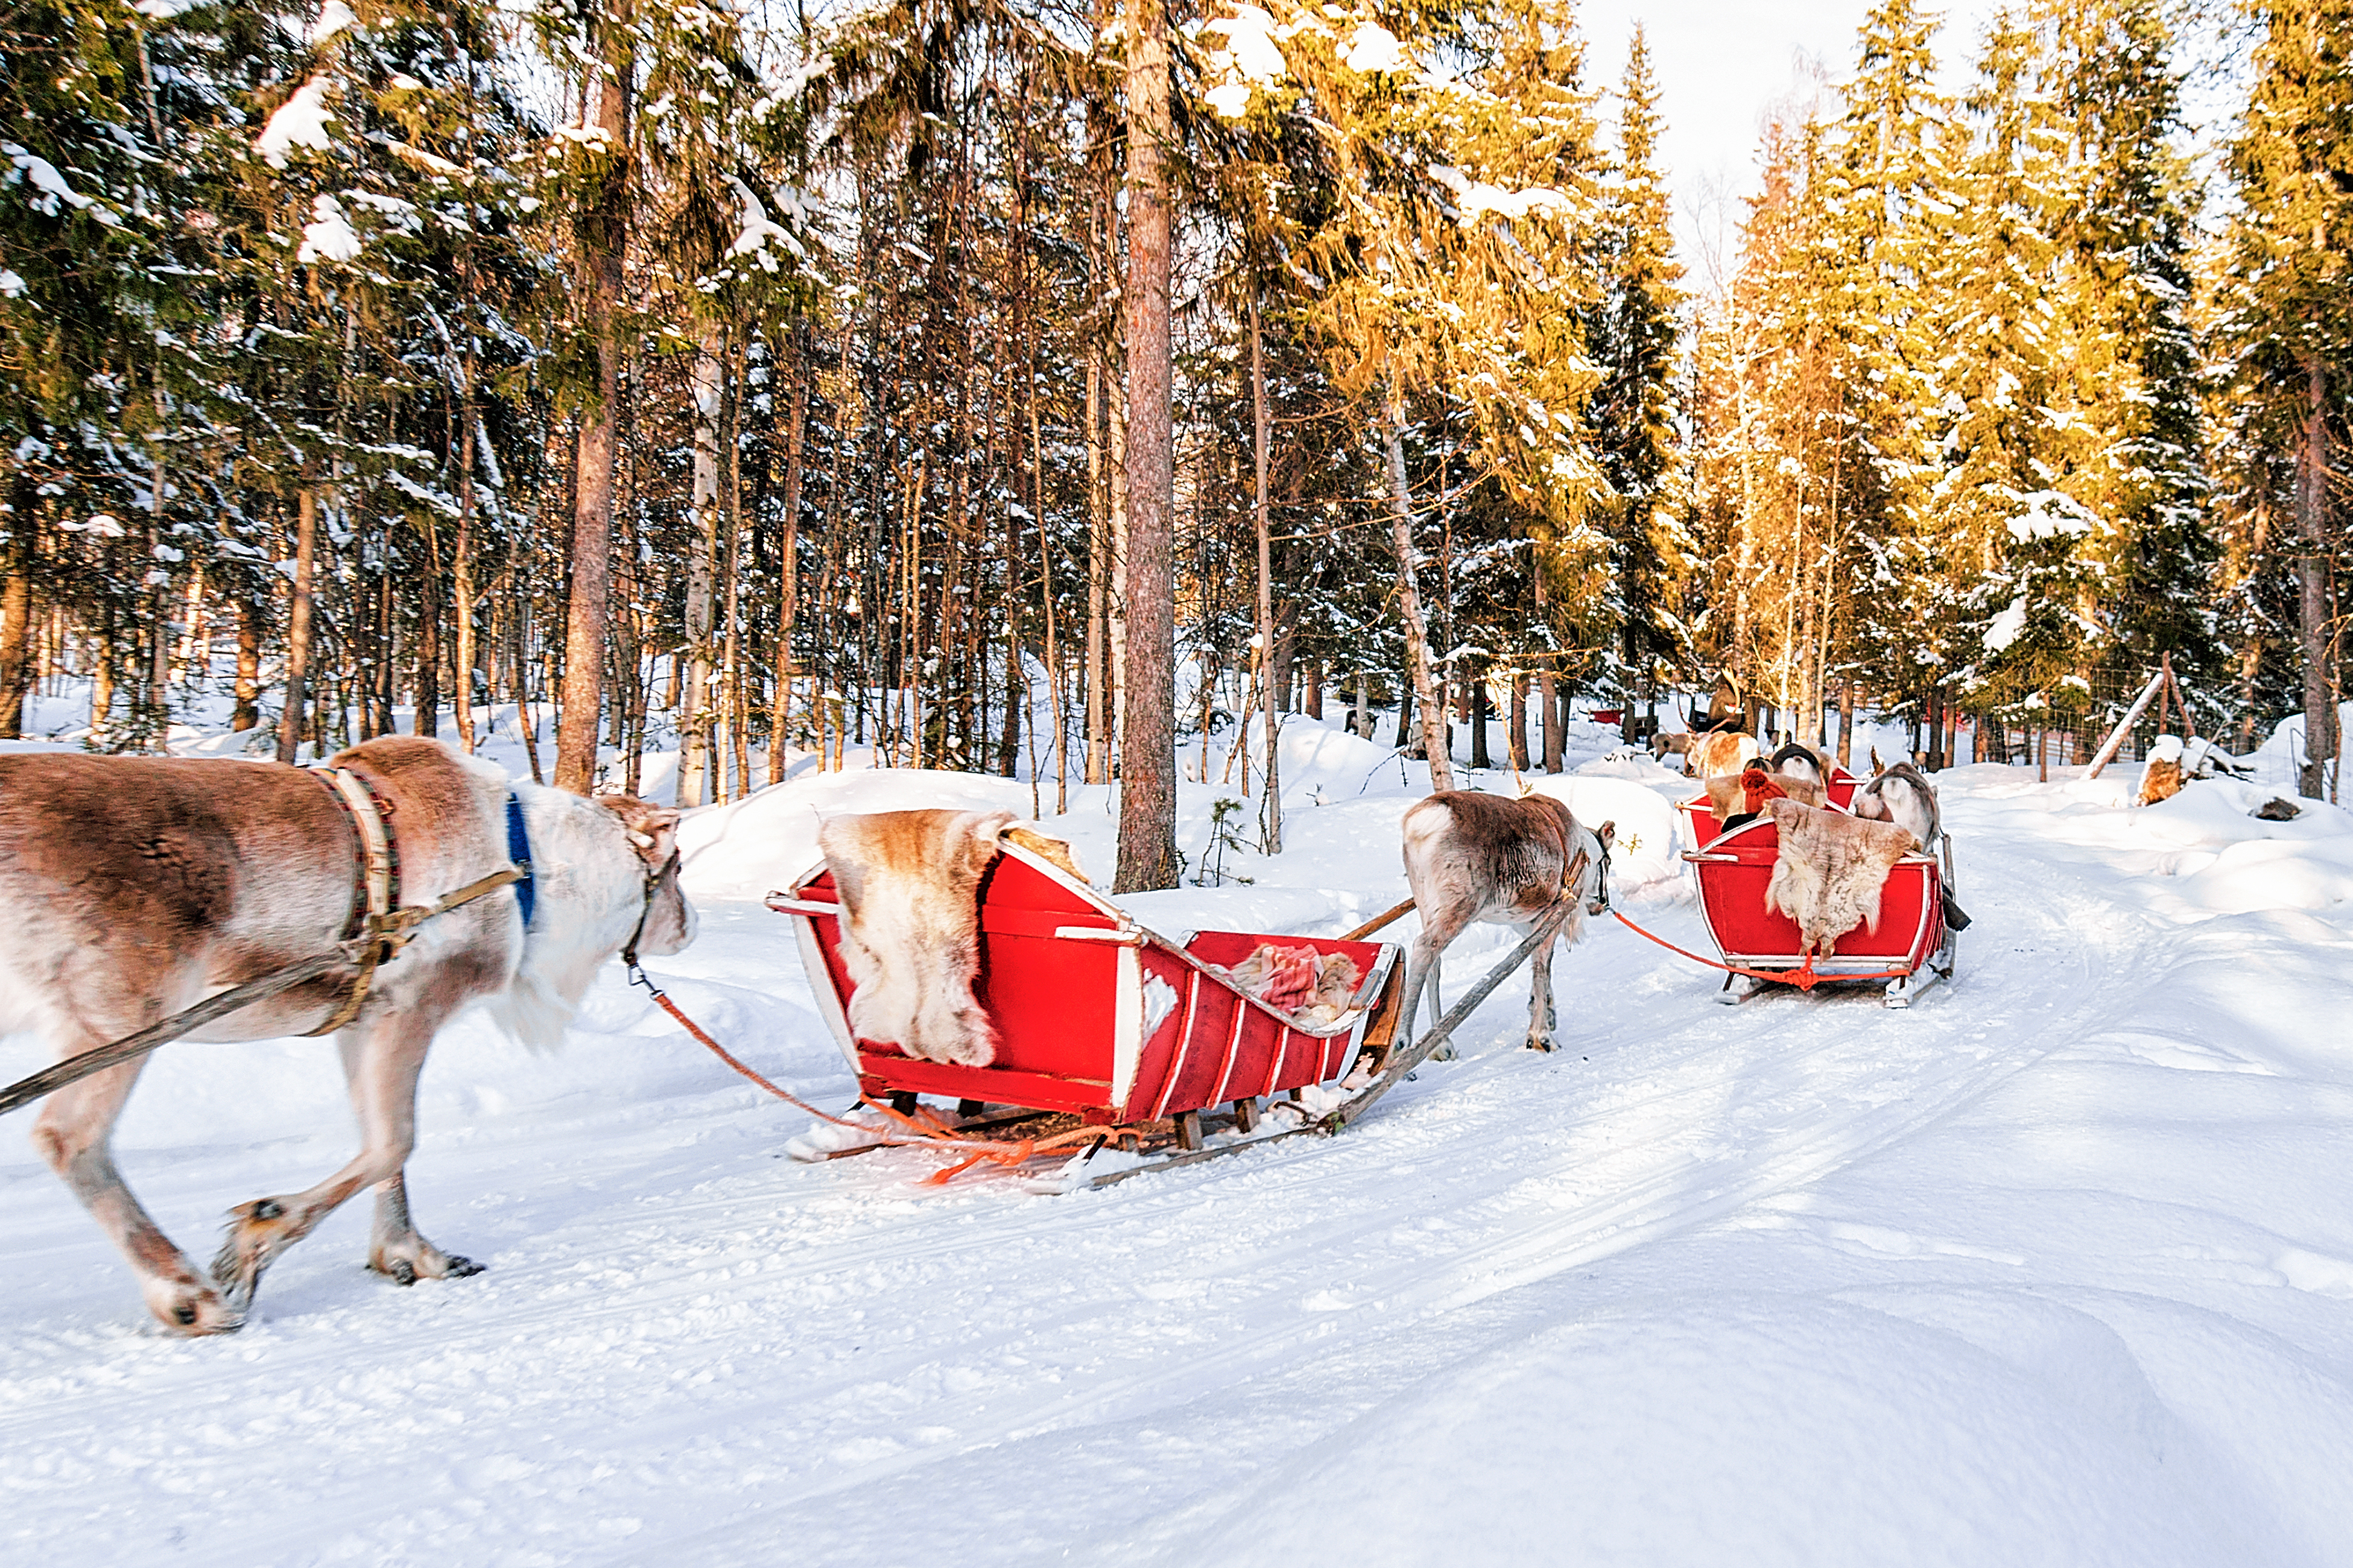 Choosing Finland for your Lapland Holiday